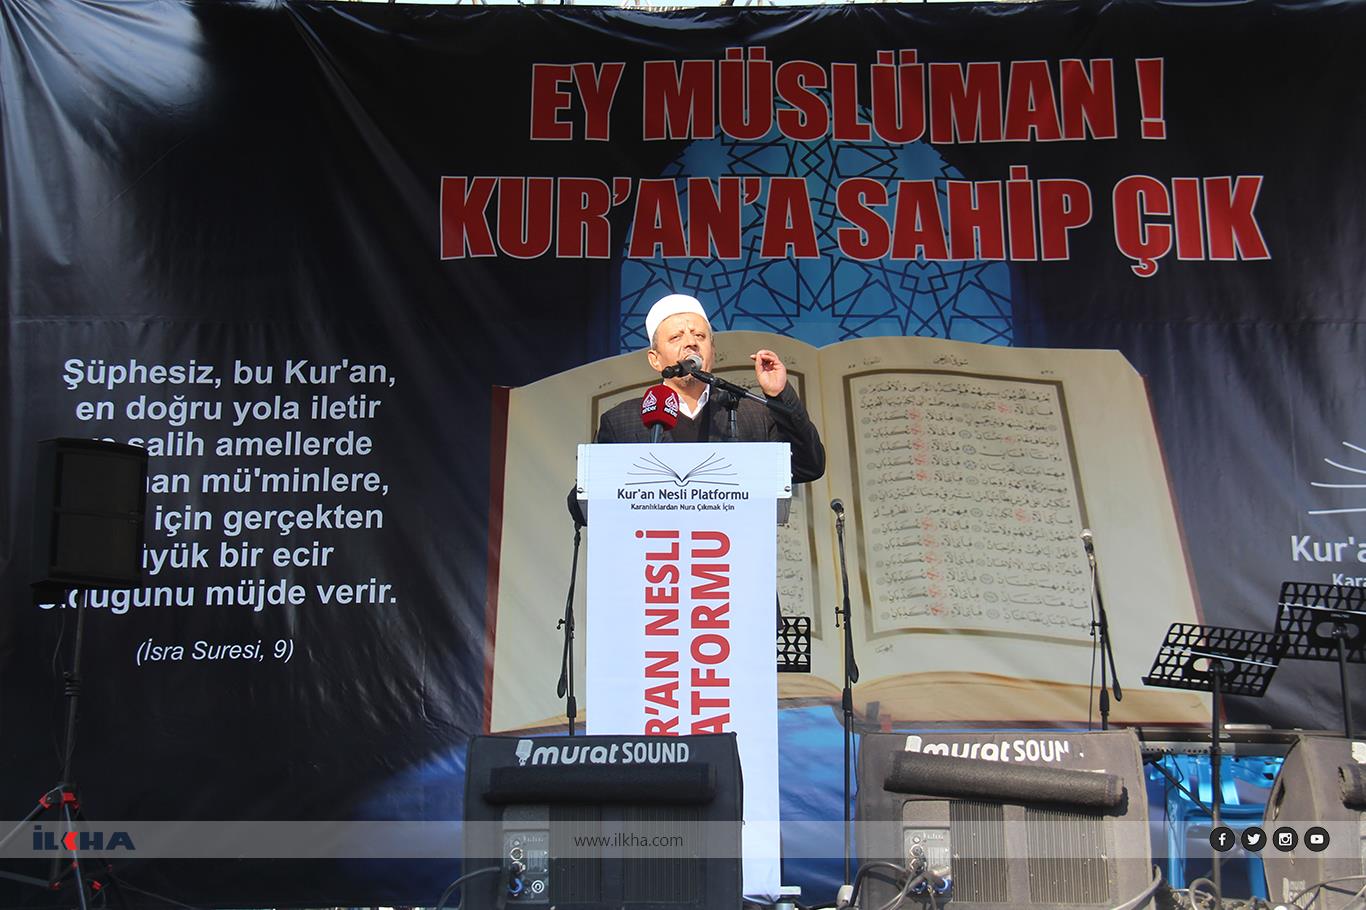 “Allah has taken the responsibility of protecting the Quran, nobody can extinguish its light”